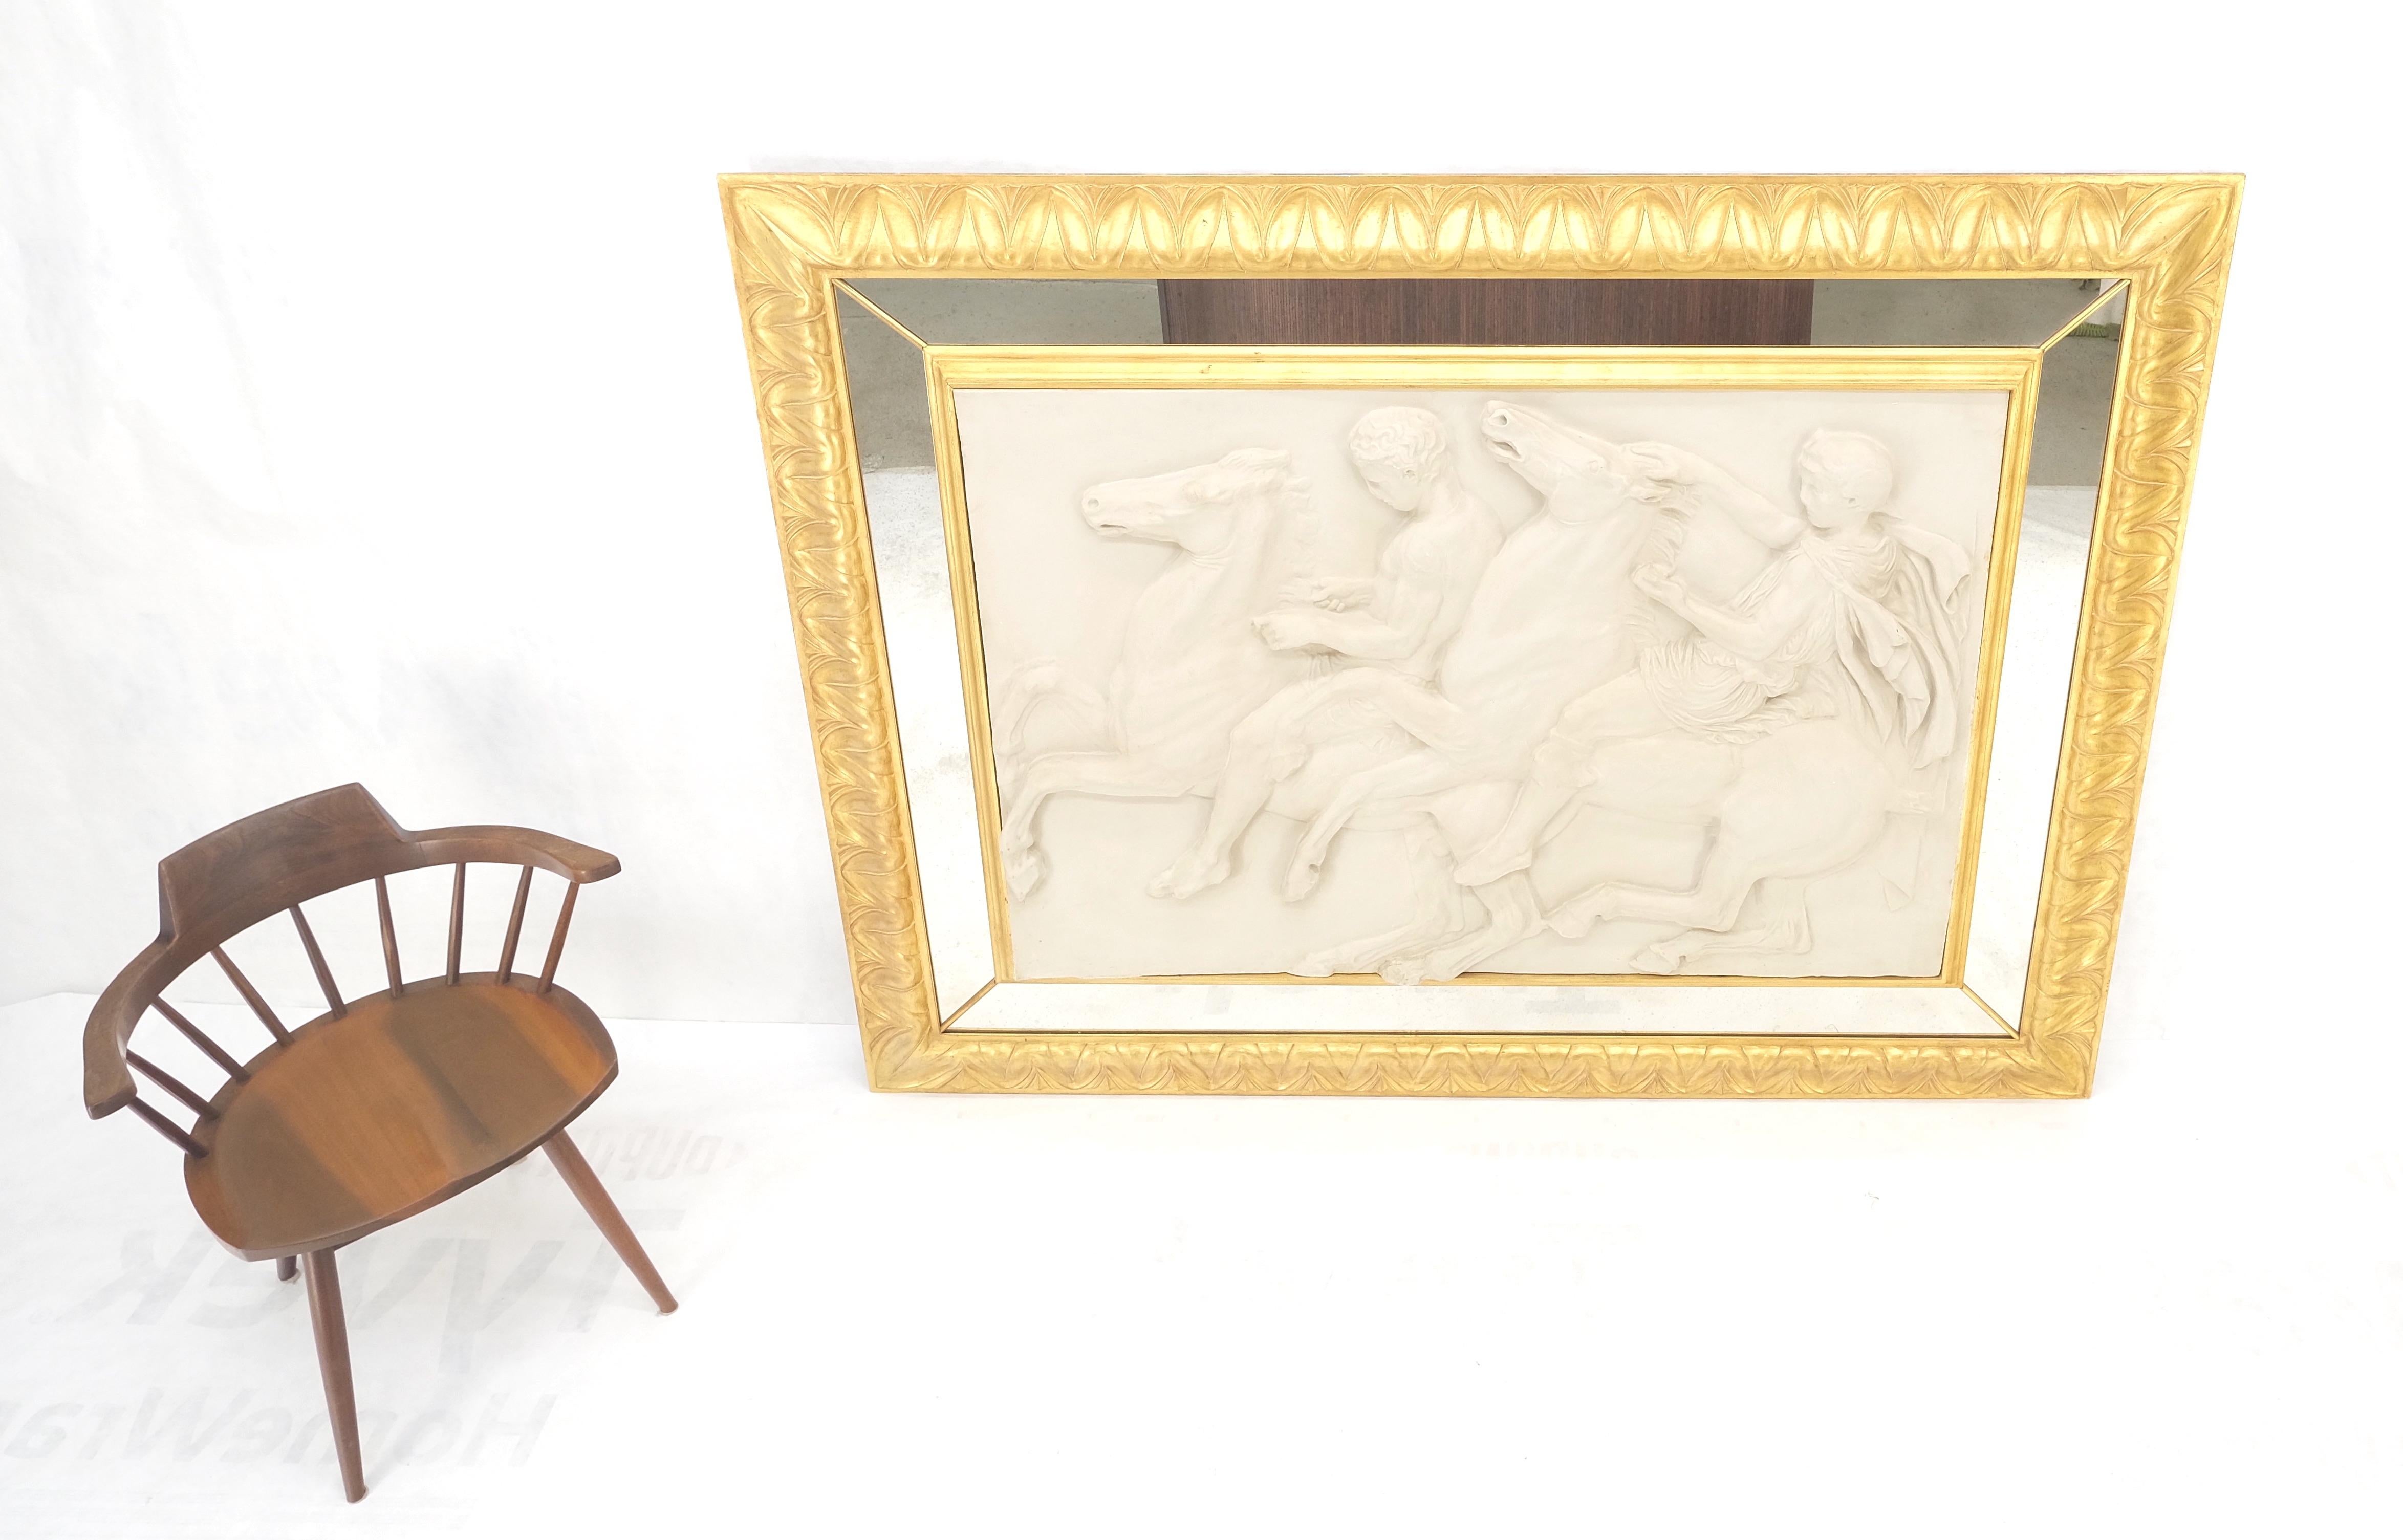 Rococo Revival Large Carved Alabaster Horse Riding Scene Wall Plaque In Gold Leaf Mirror Frame